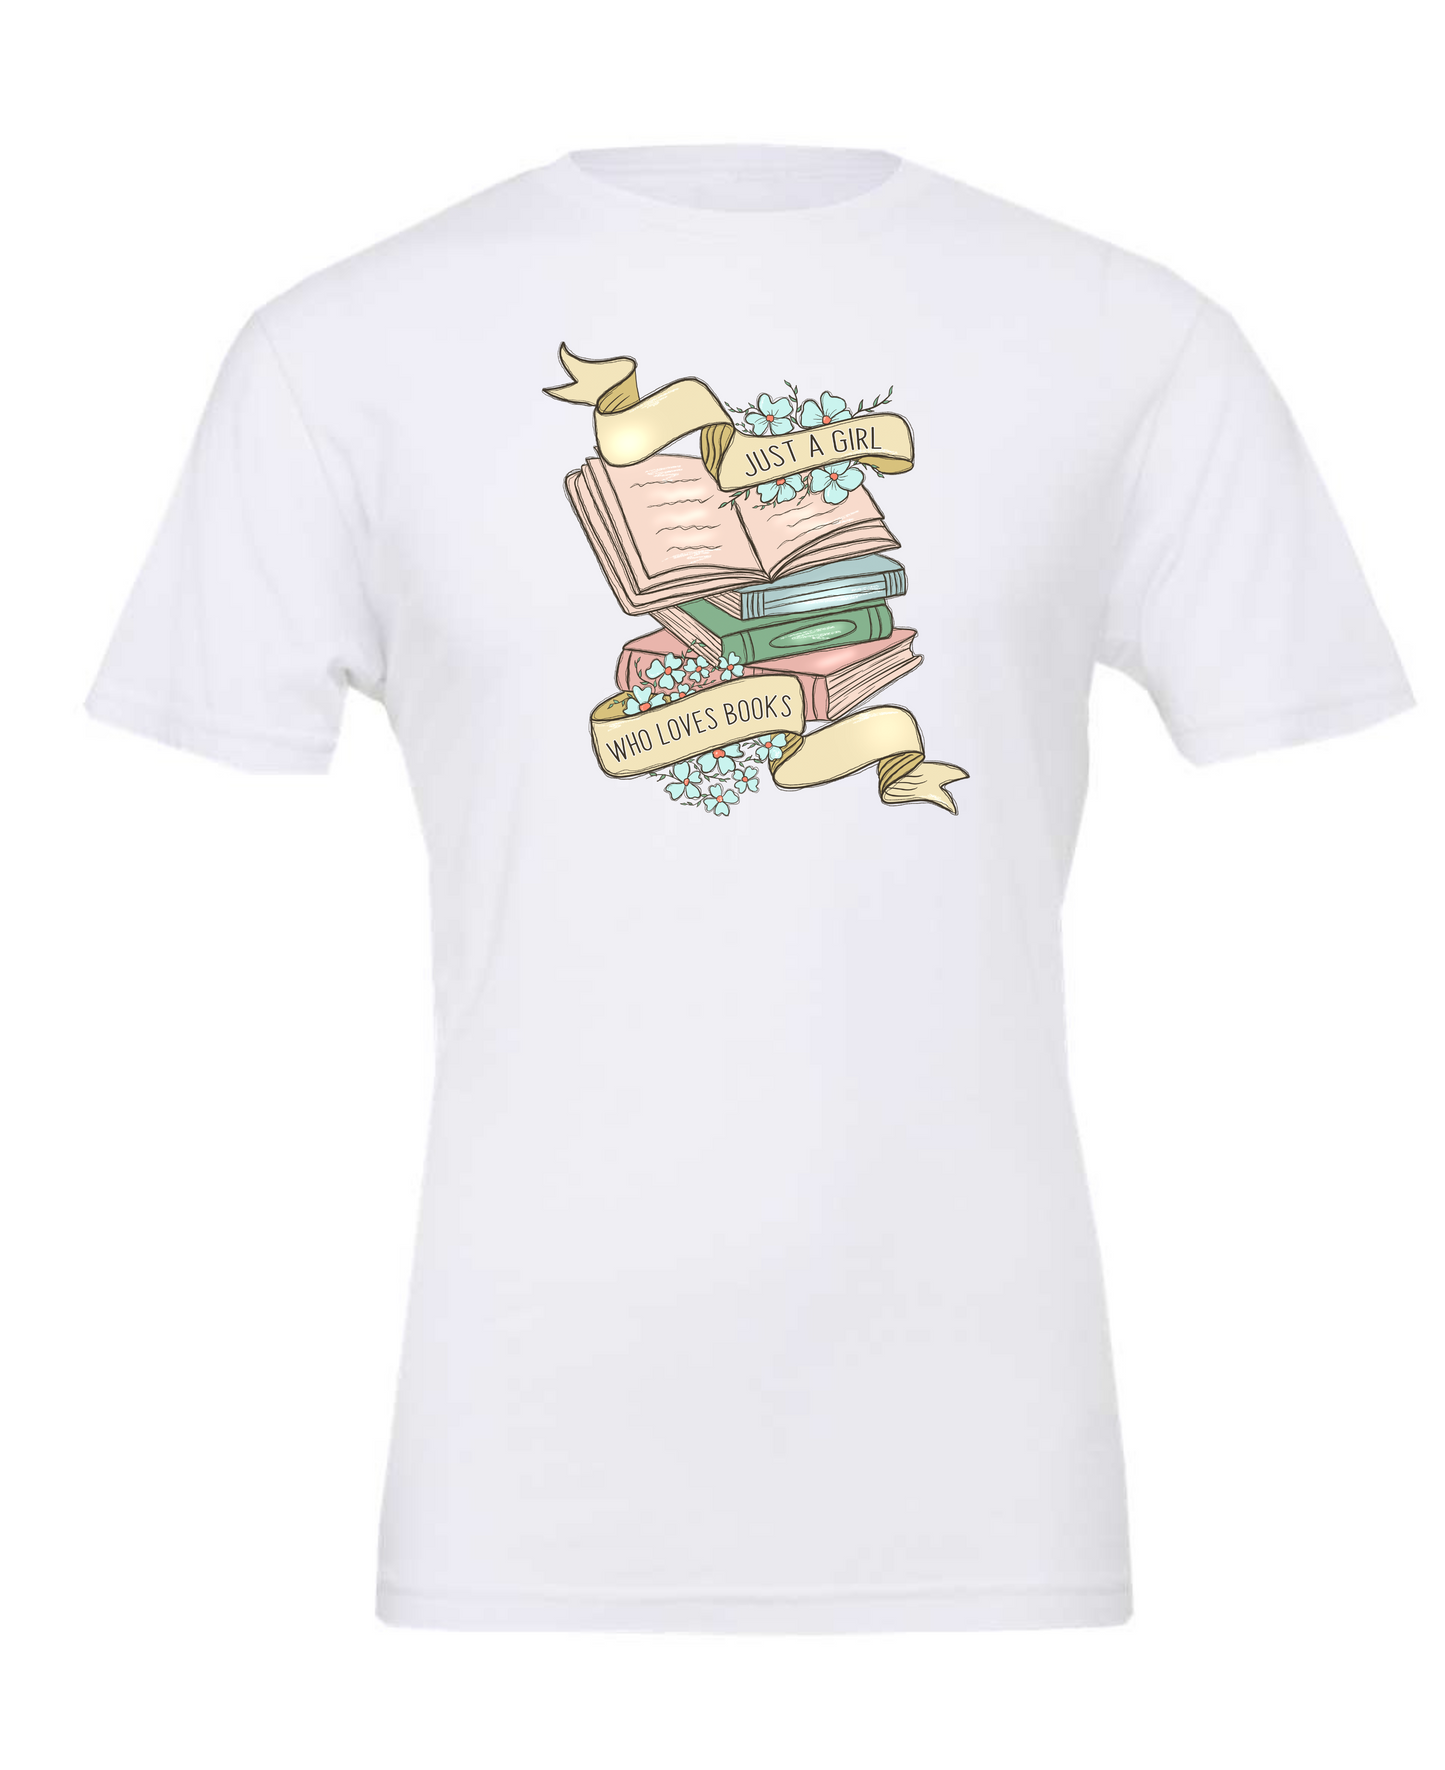 Just A Girl Who Likes to Read Short Sleeve Shirt - DTG